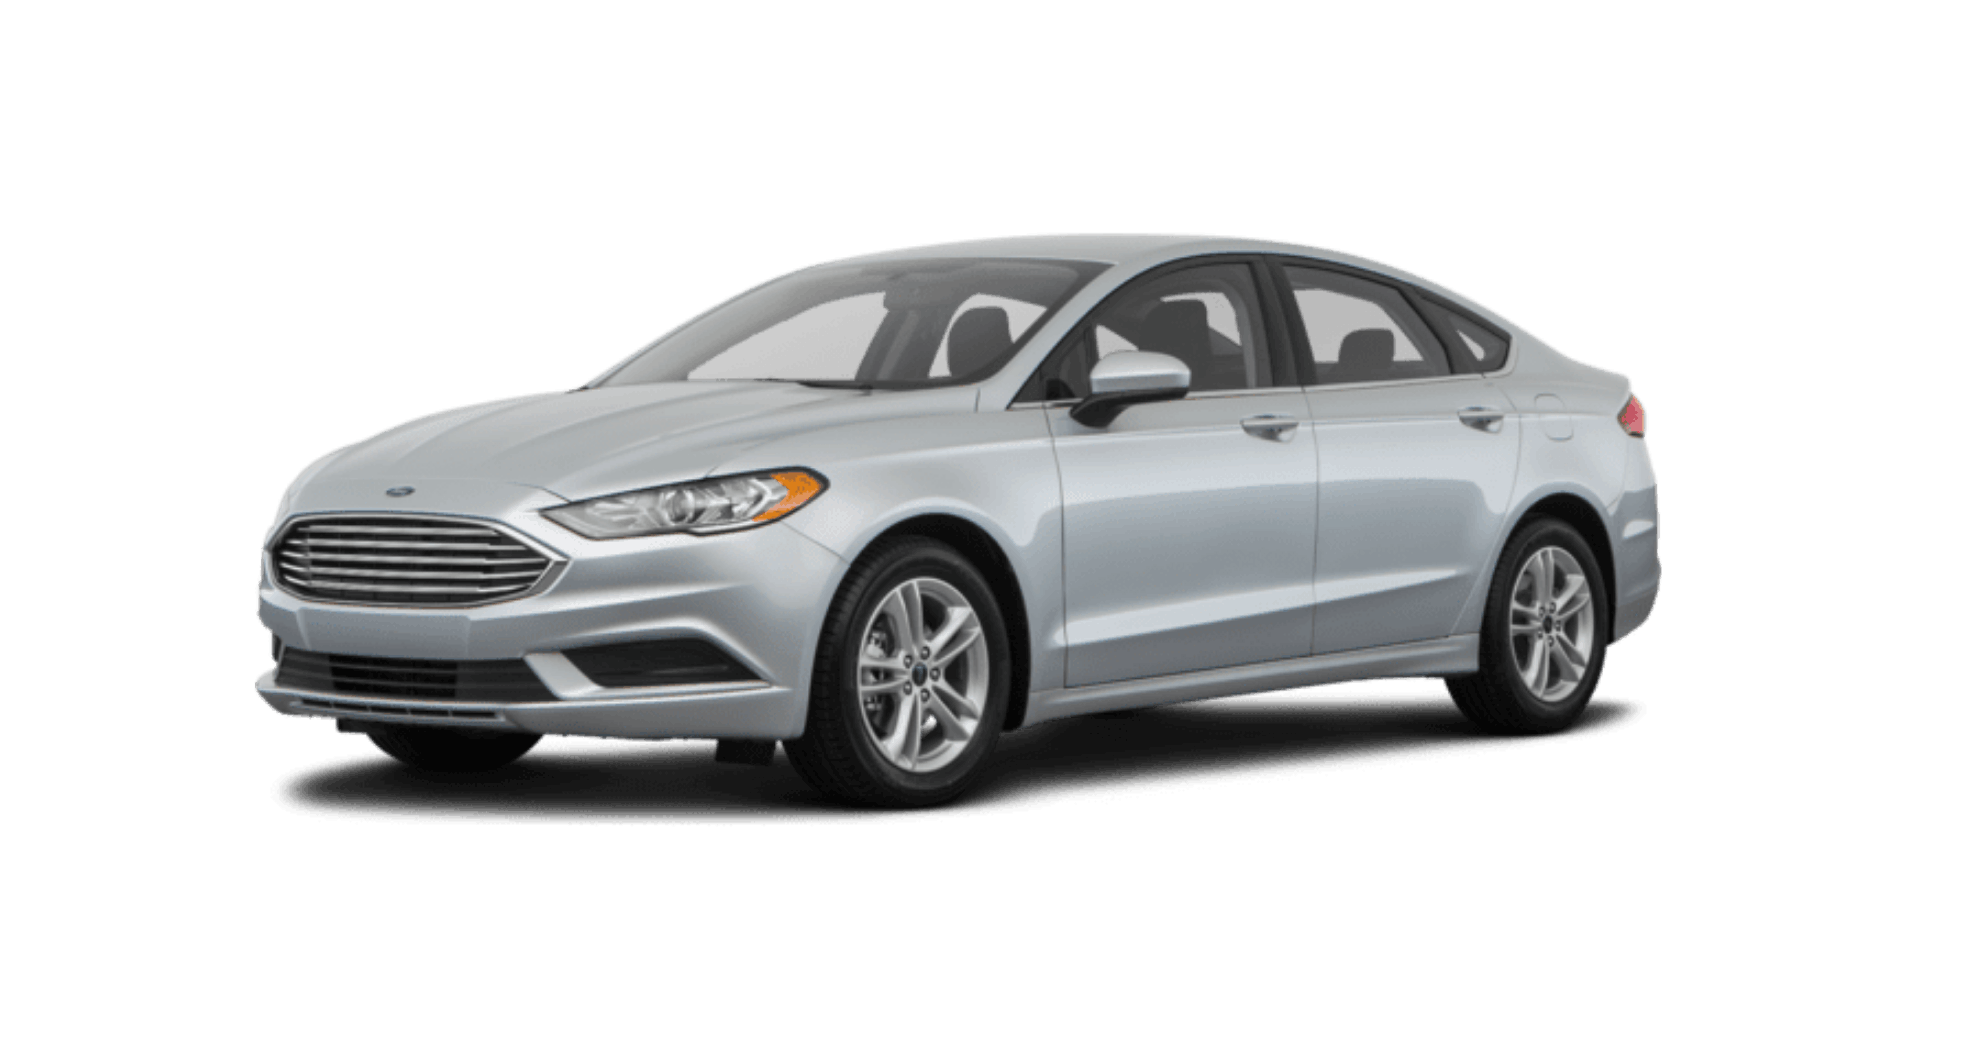 How to buy a used Ford Fusion Hybrid at an auction in the USA